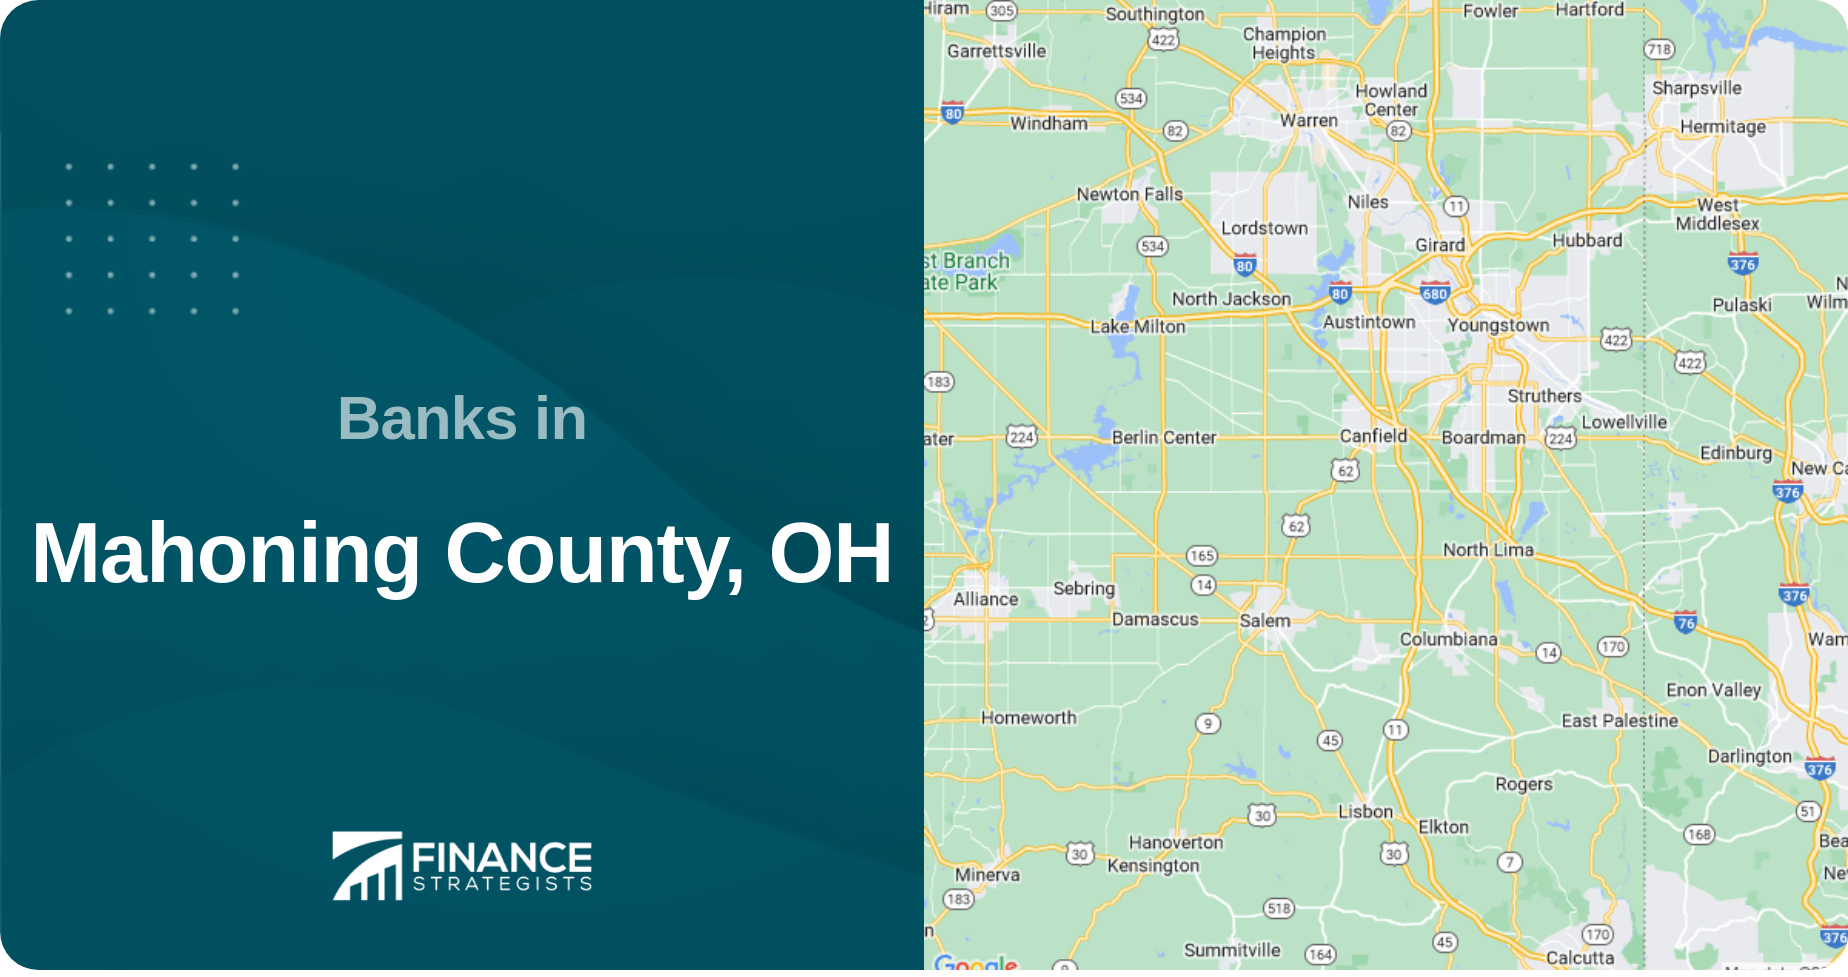 Banks in Mahoning County, OH